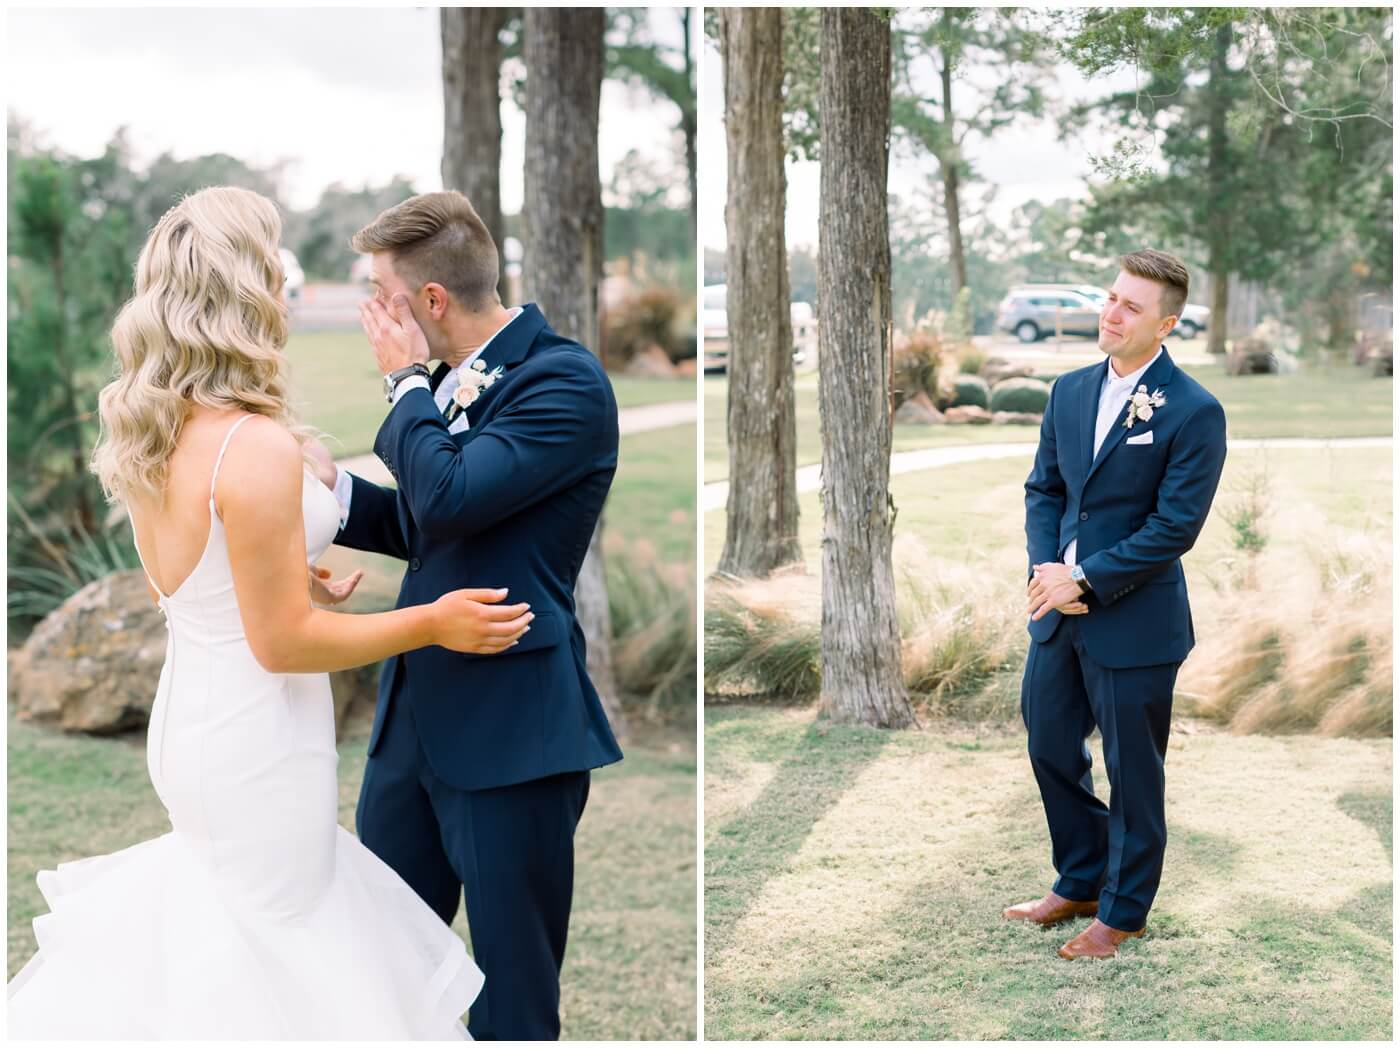 Houston Wedding at The Vine | the groom is crying as he sees his bride during their first look